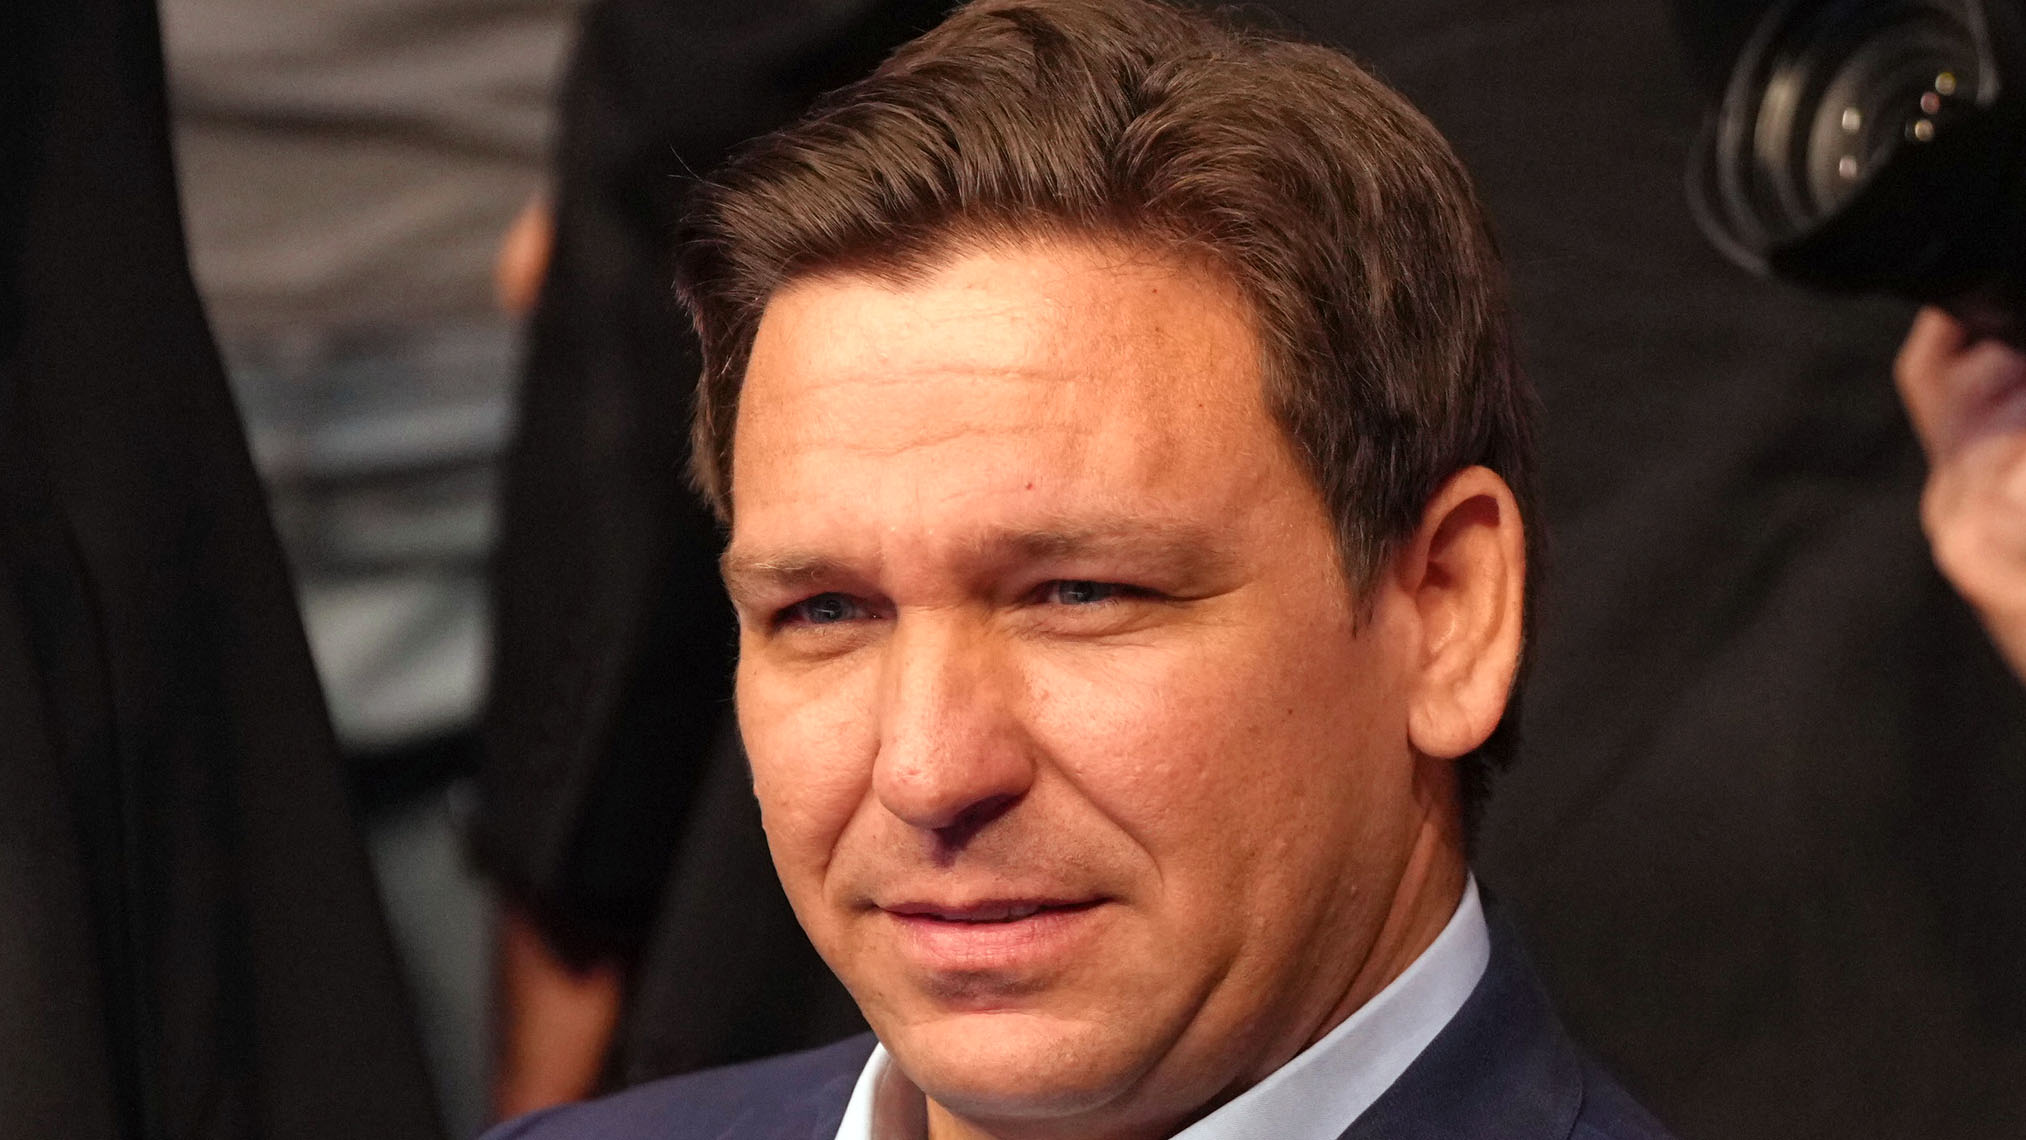 DeSantis Signals Florida Moving To Take Action Against Twitter For Breaching Fiduciary Duty On Musk